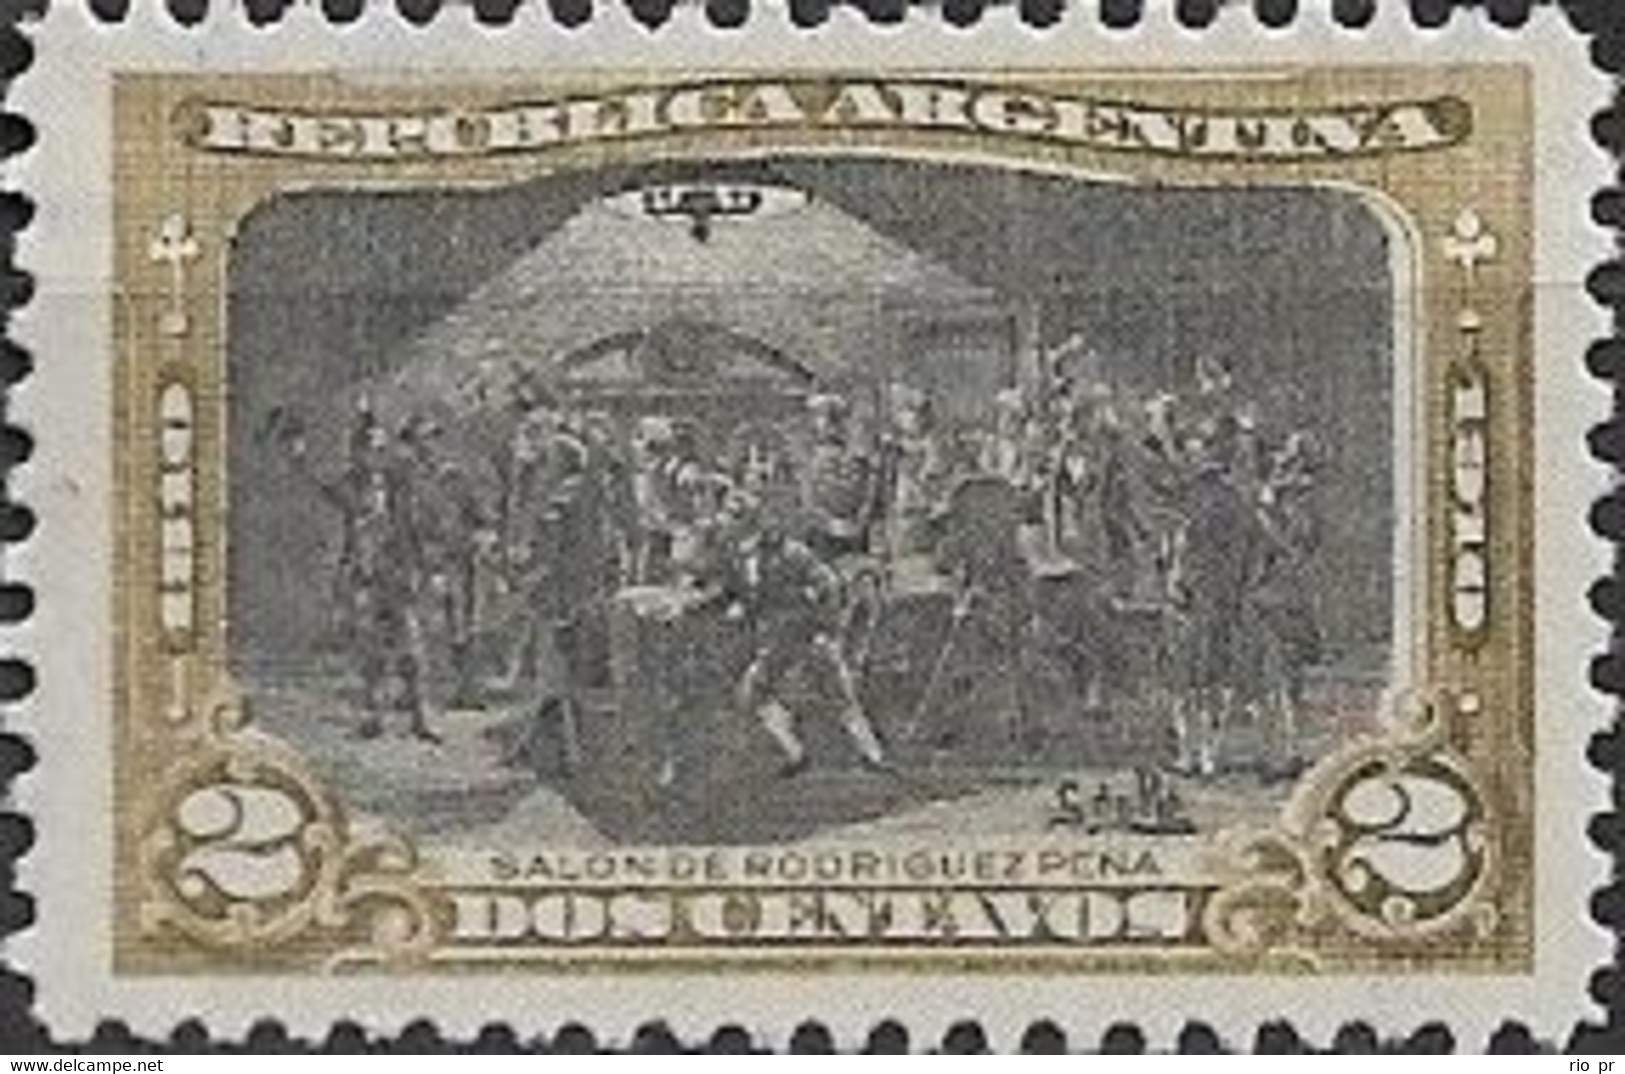 ARGENTINA - CENTENARY OF THE ARGENTINE REPUBLIC (MEETING AT PEÑA'S HOME, 2 C) 1910 - MNH - Neufs